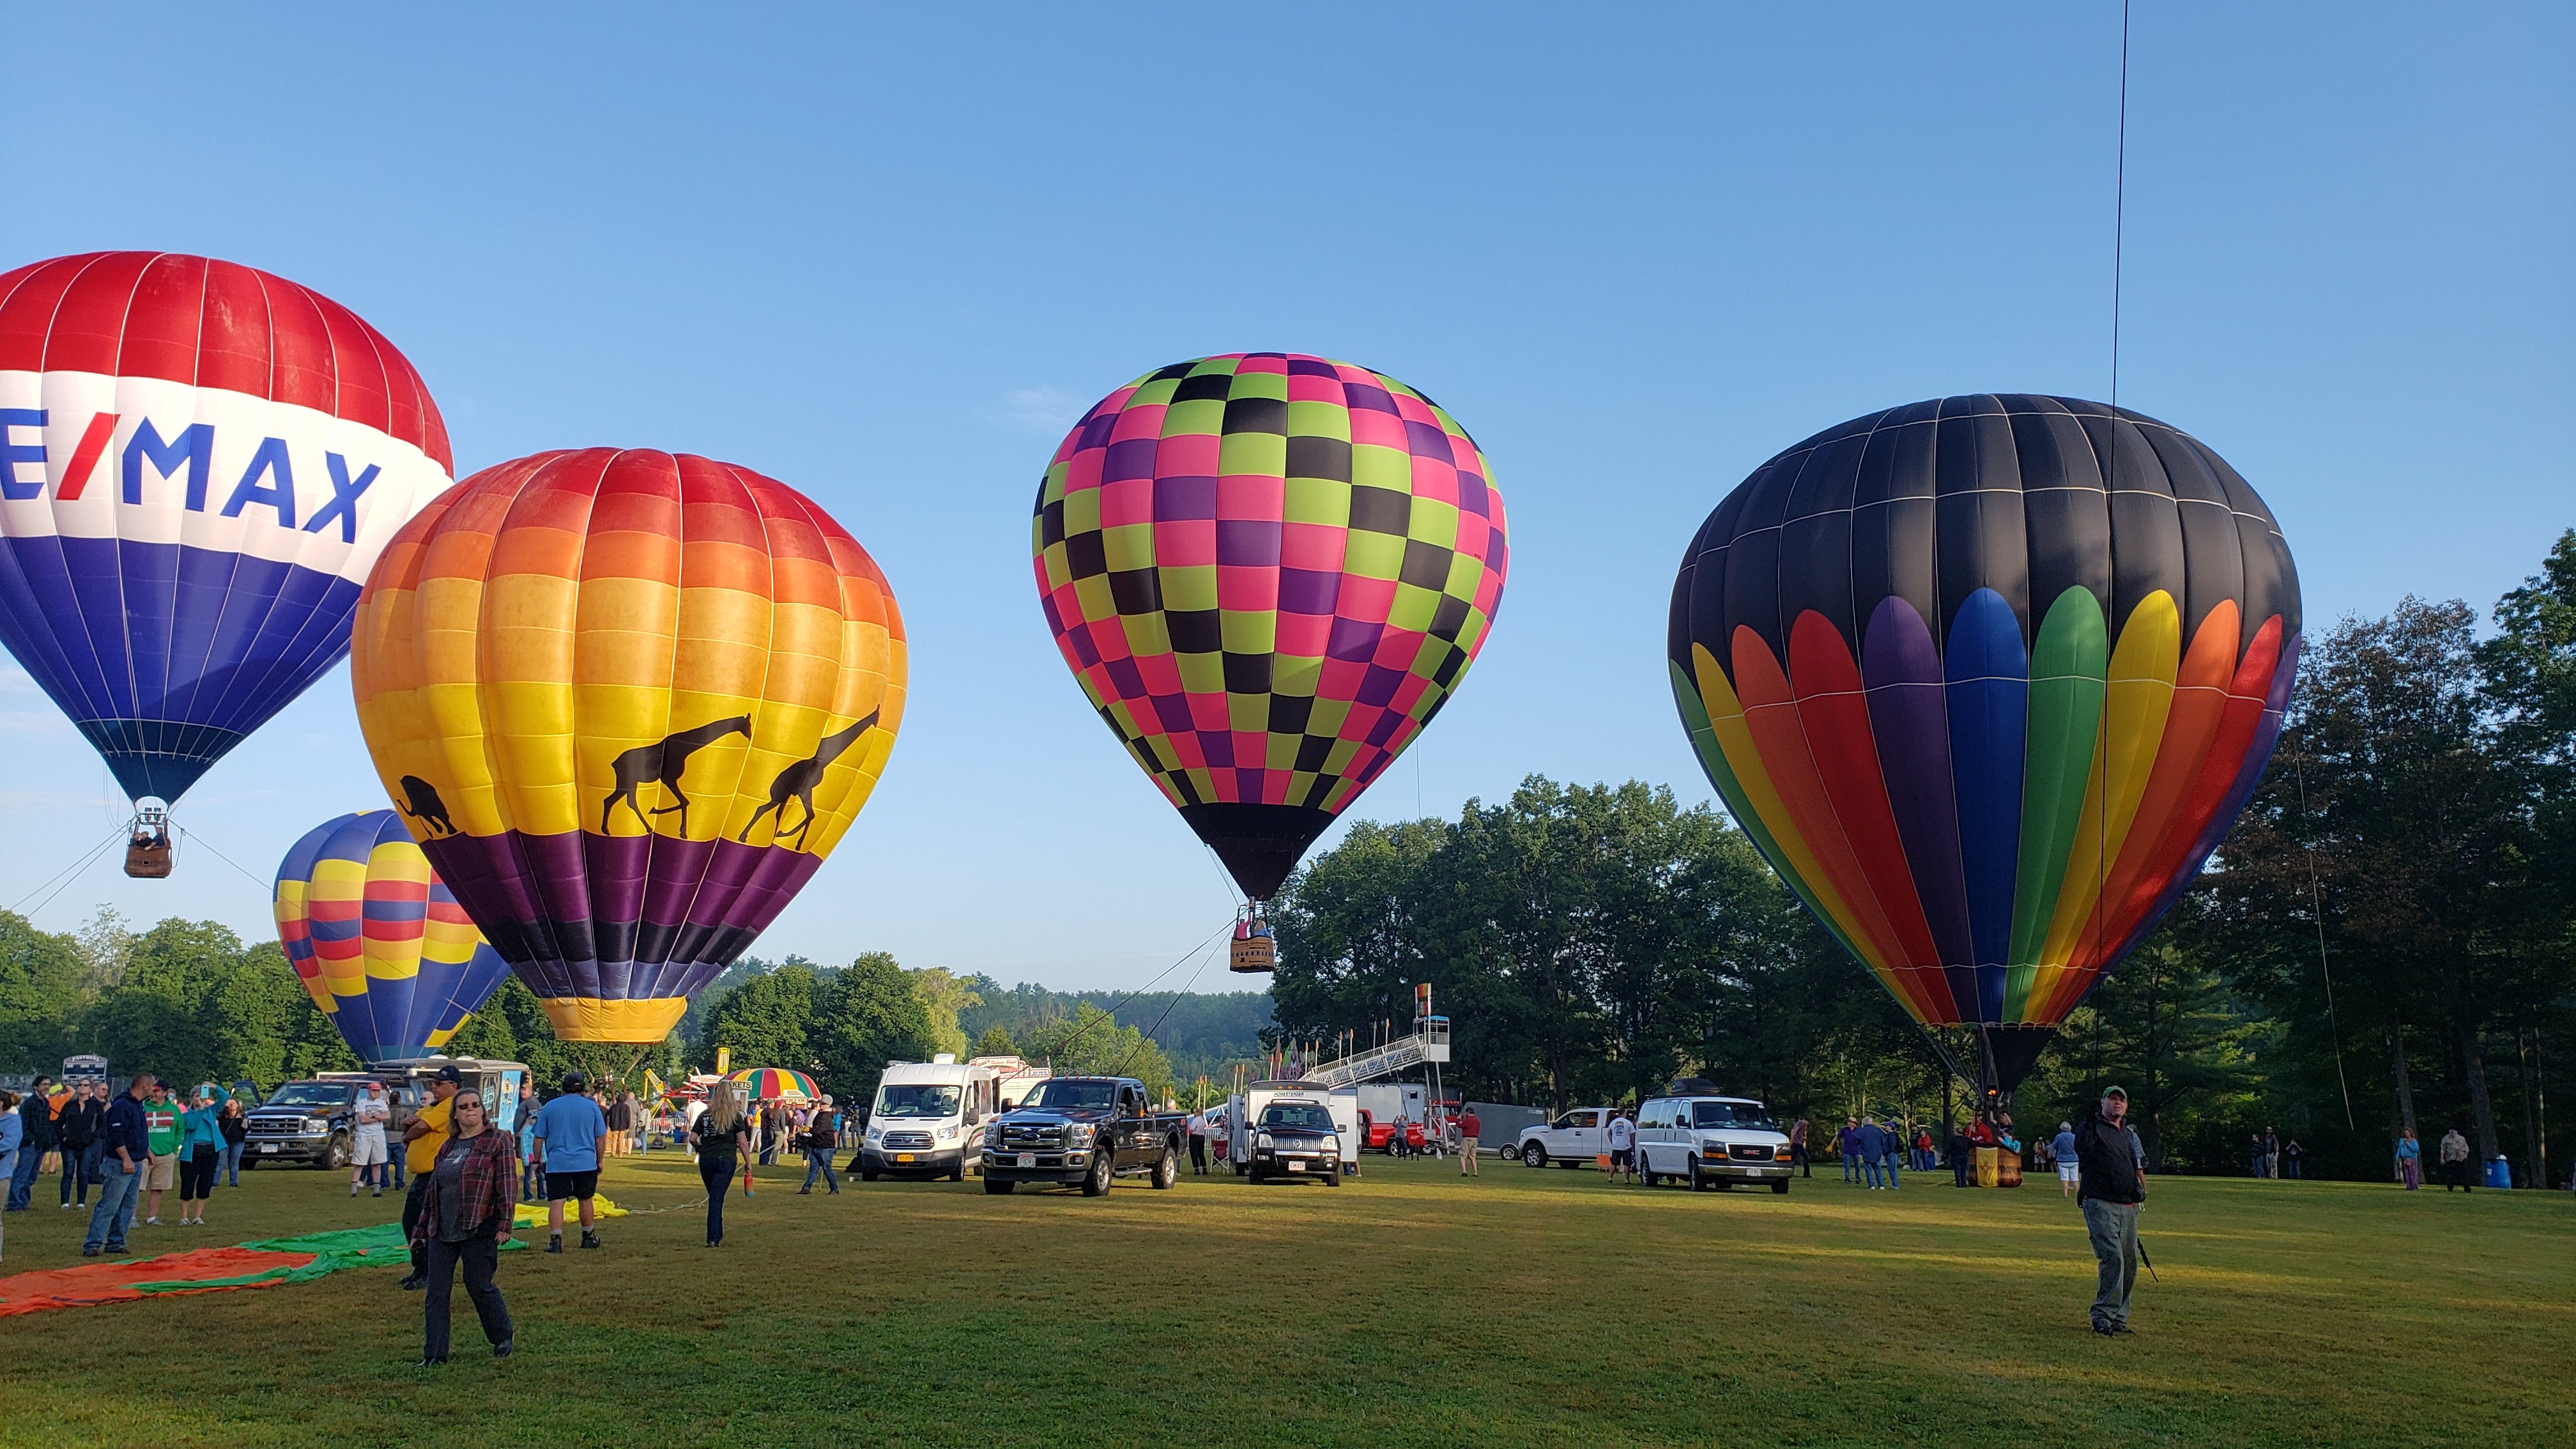 Suncook Valley Rotary Club Balloon Festival is nearby in early August. This morning it was too windy for takeoff, so they were staying tethered to the groun.